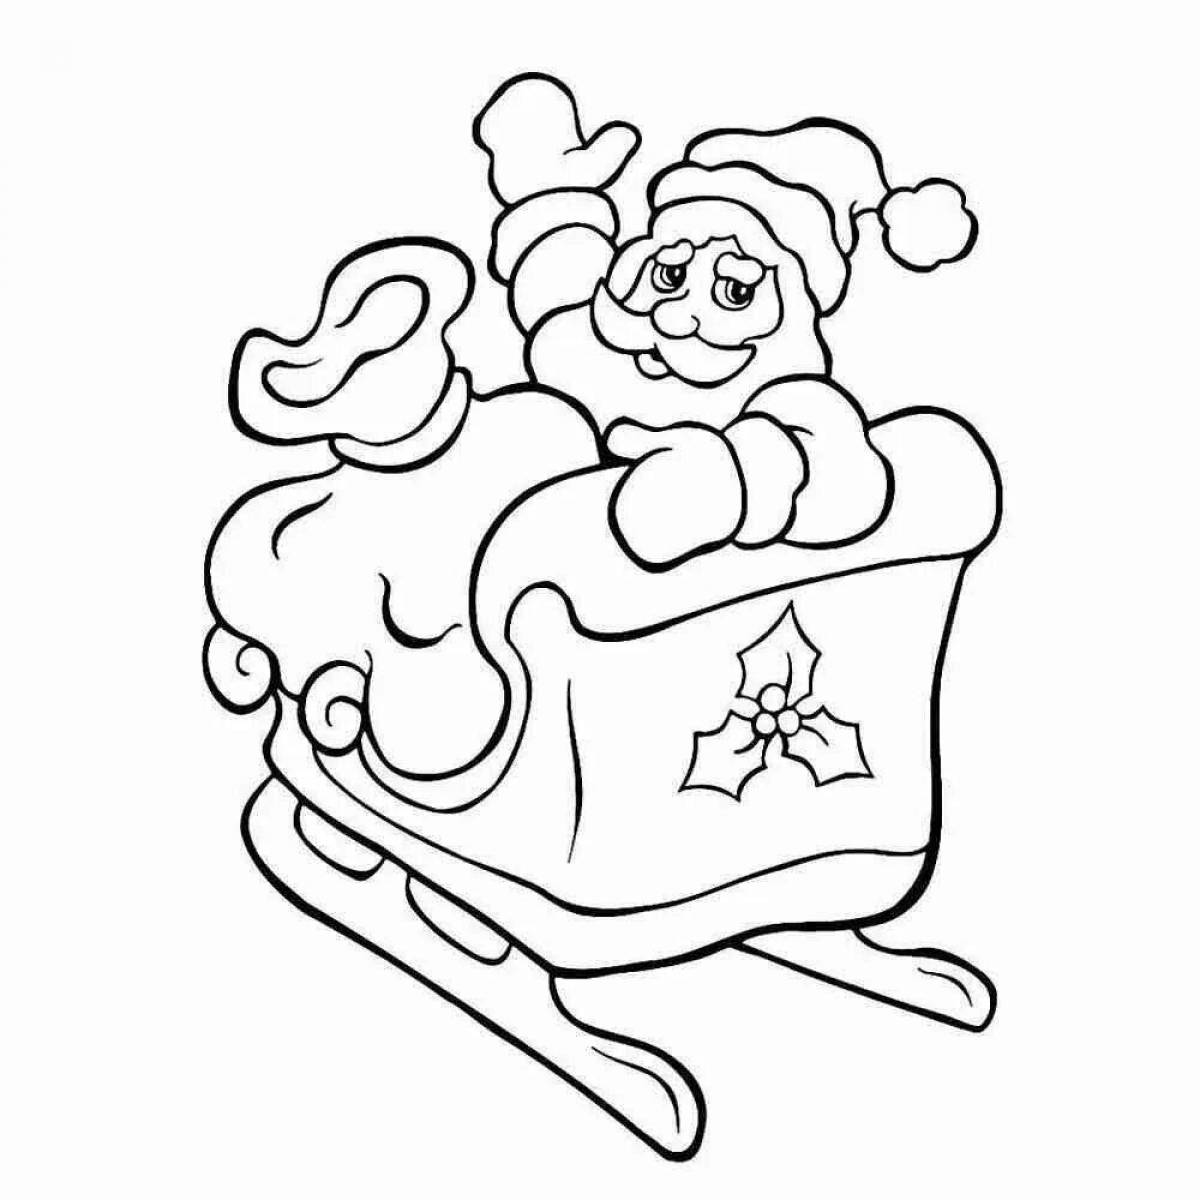 Coloring page excited santa claus on sleigh